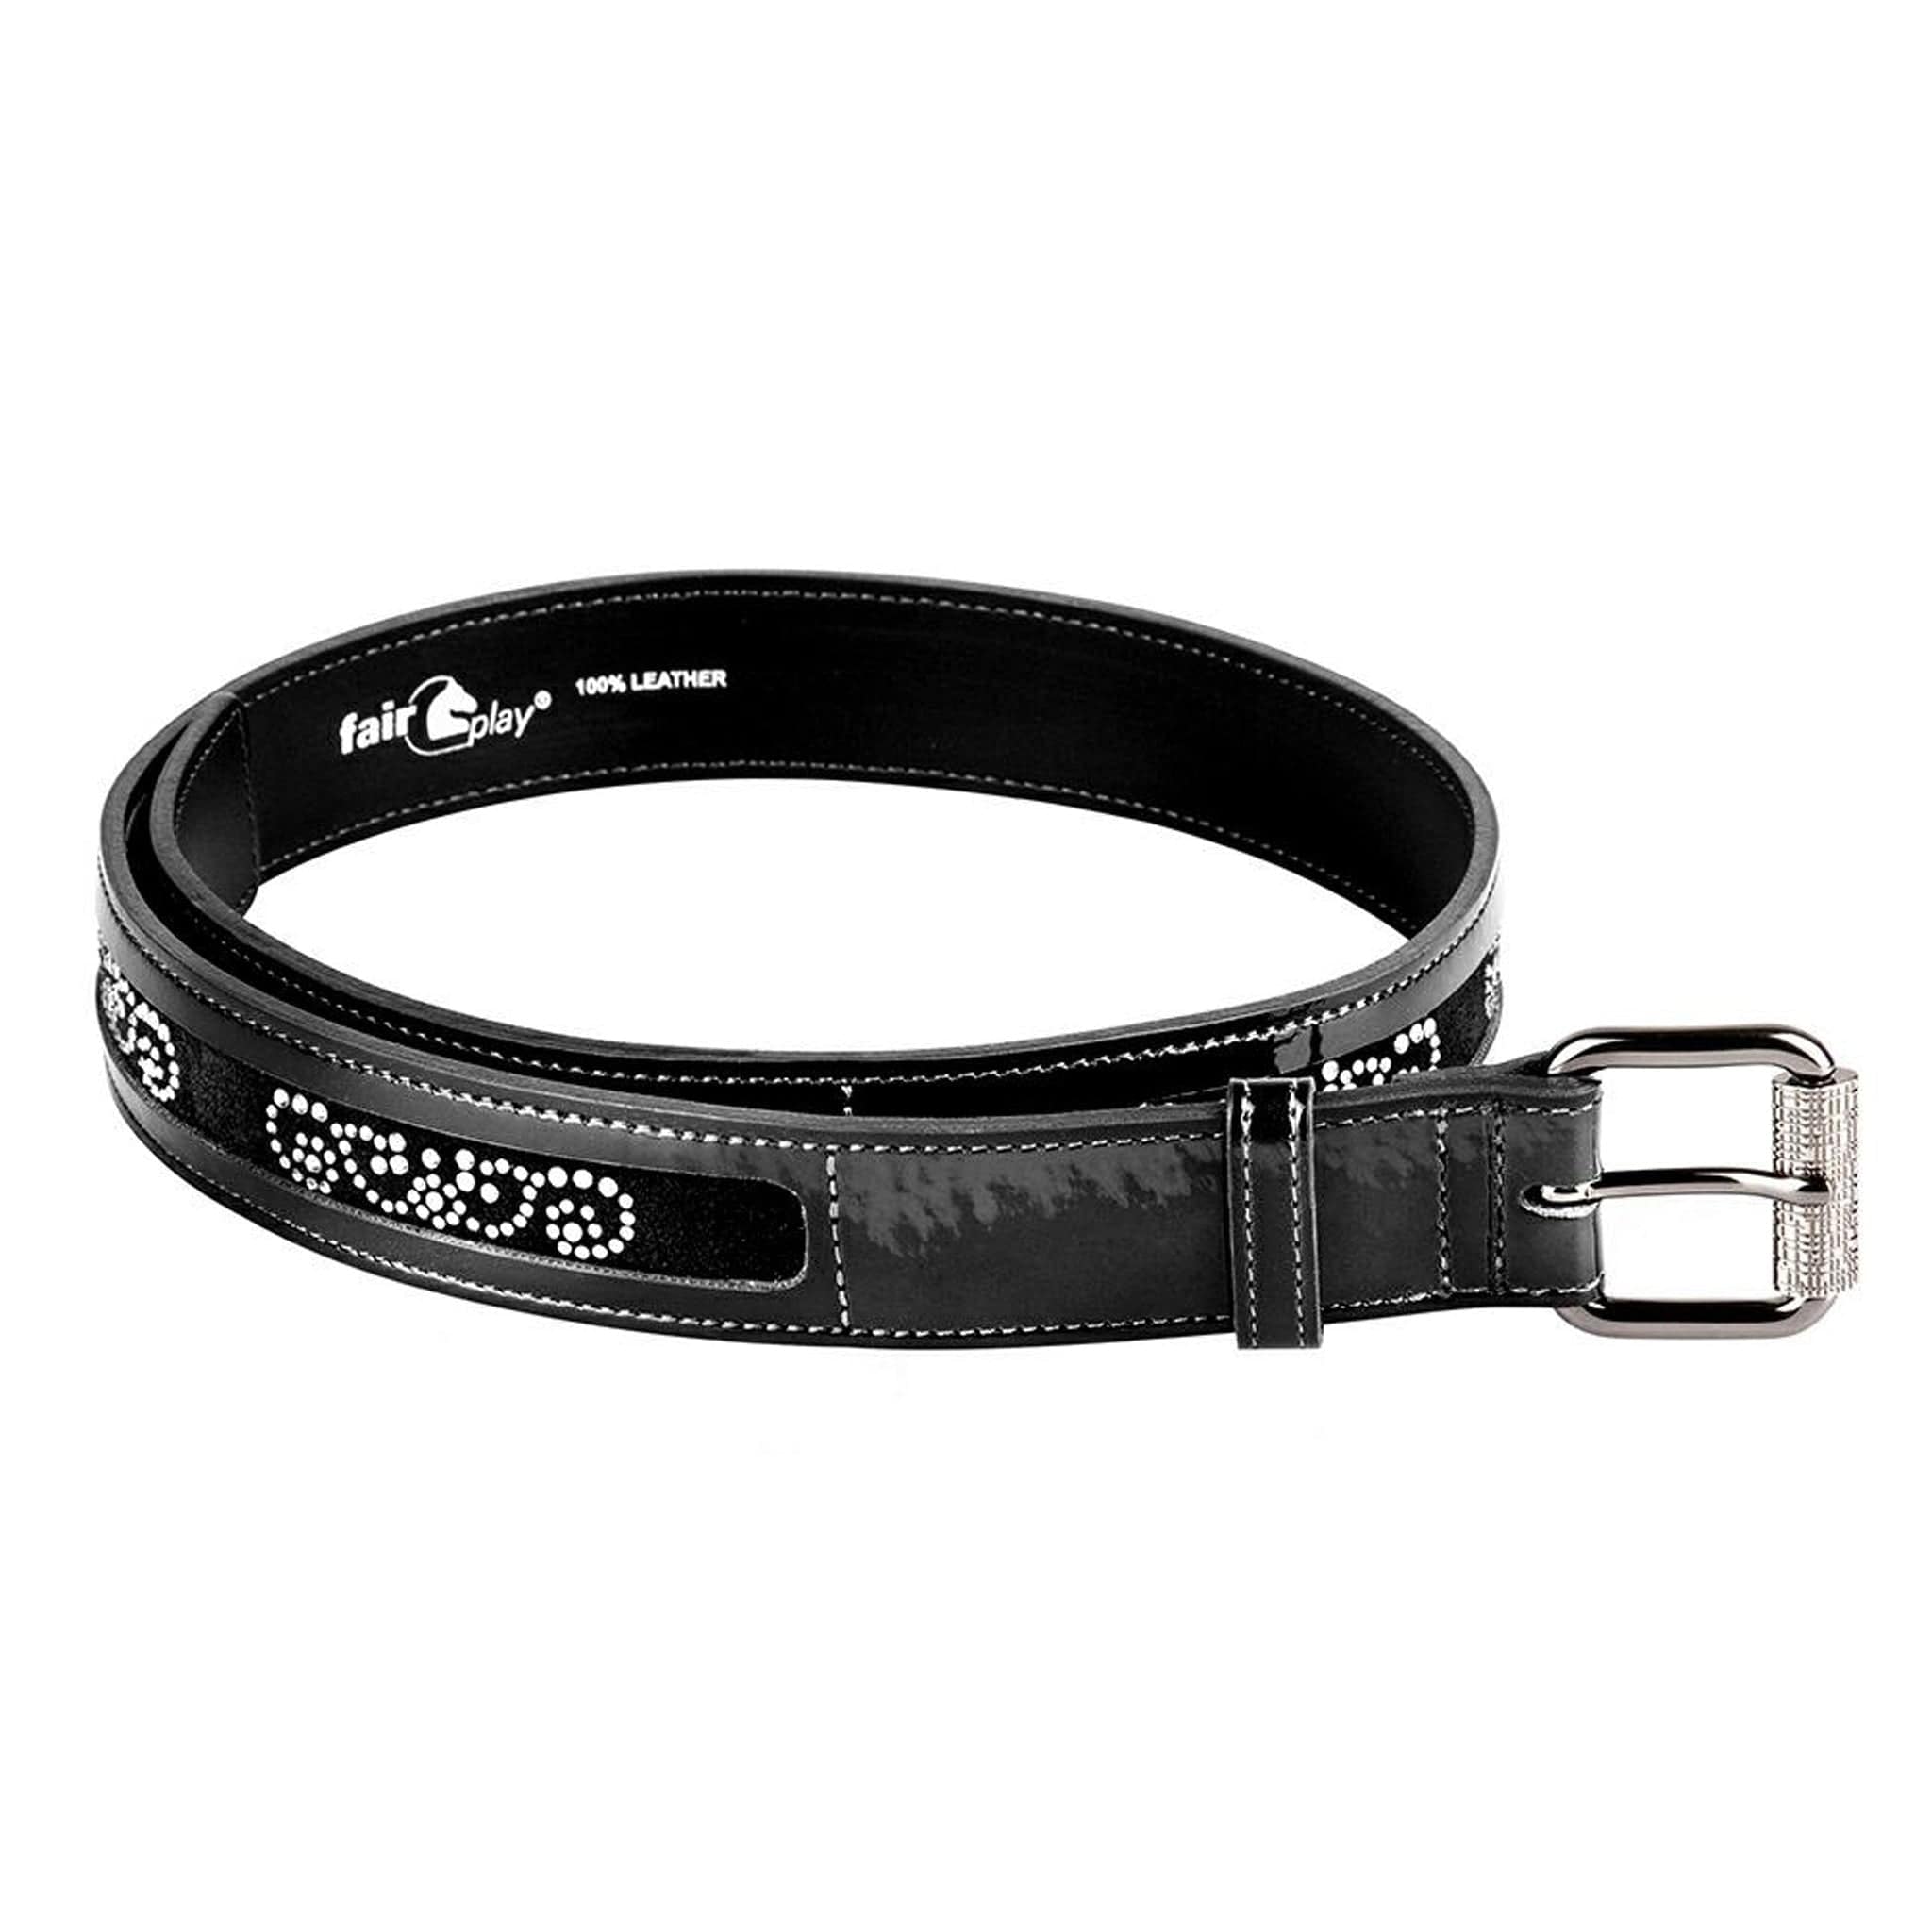 Fair Play Clarence Chic Belt Black 02010